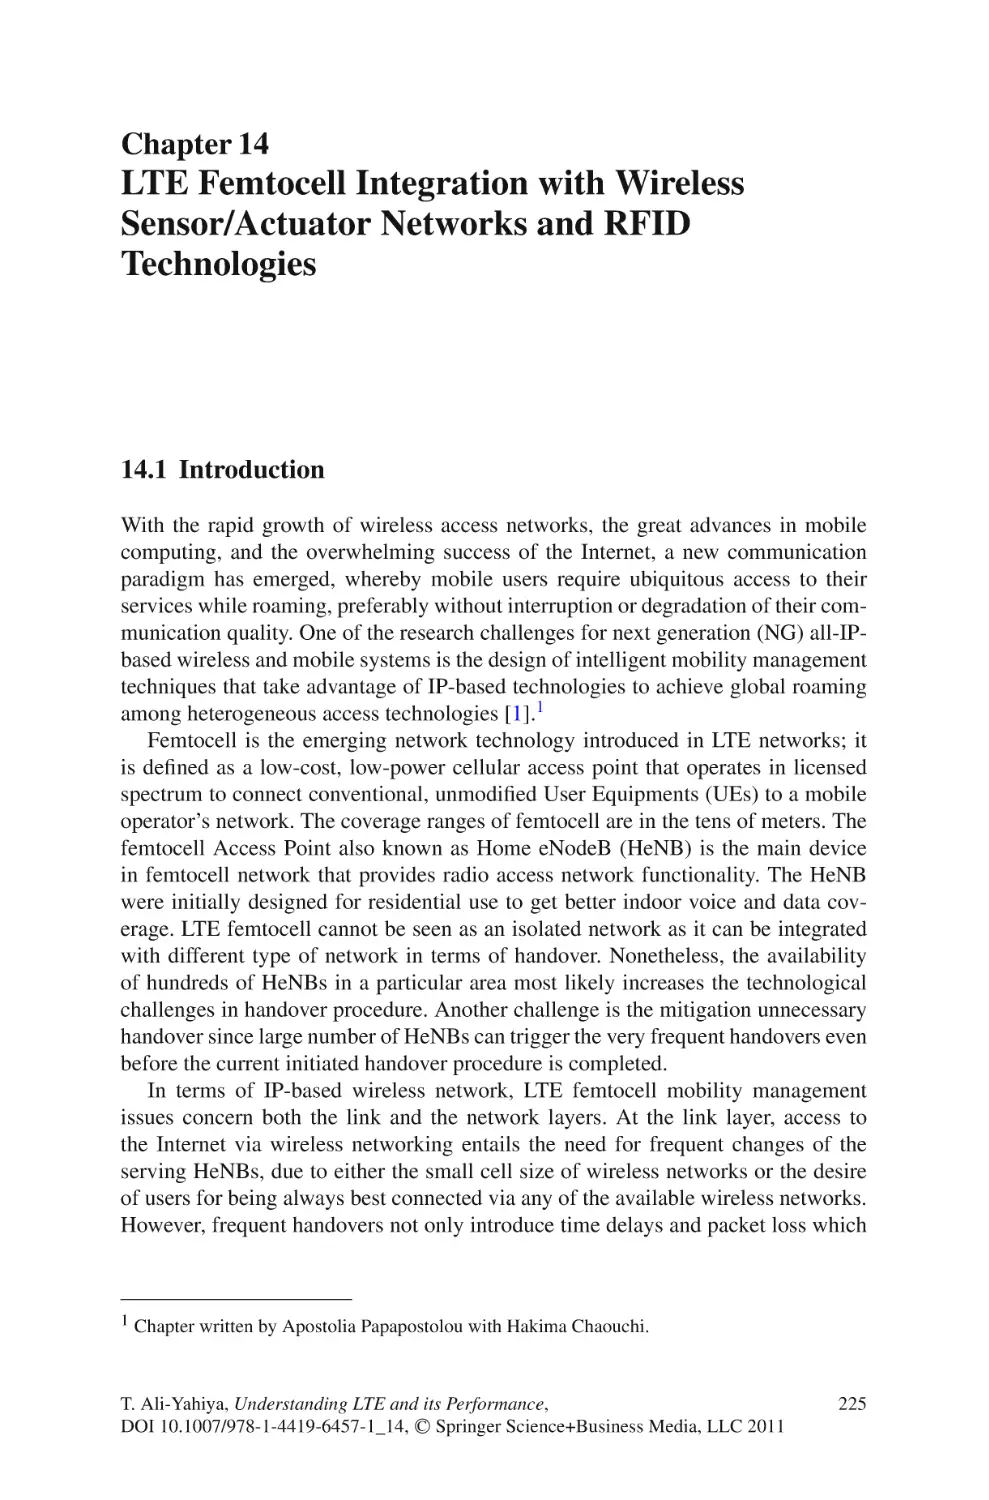 14  LTE Femtocell Integration with Wireless Sensor/Actuator Networks and RFID Technologies
14.1  Introduction